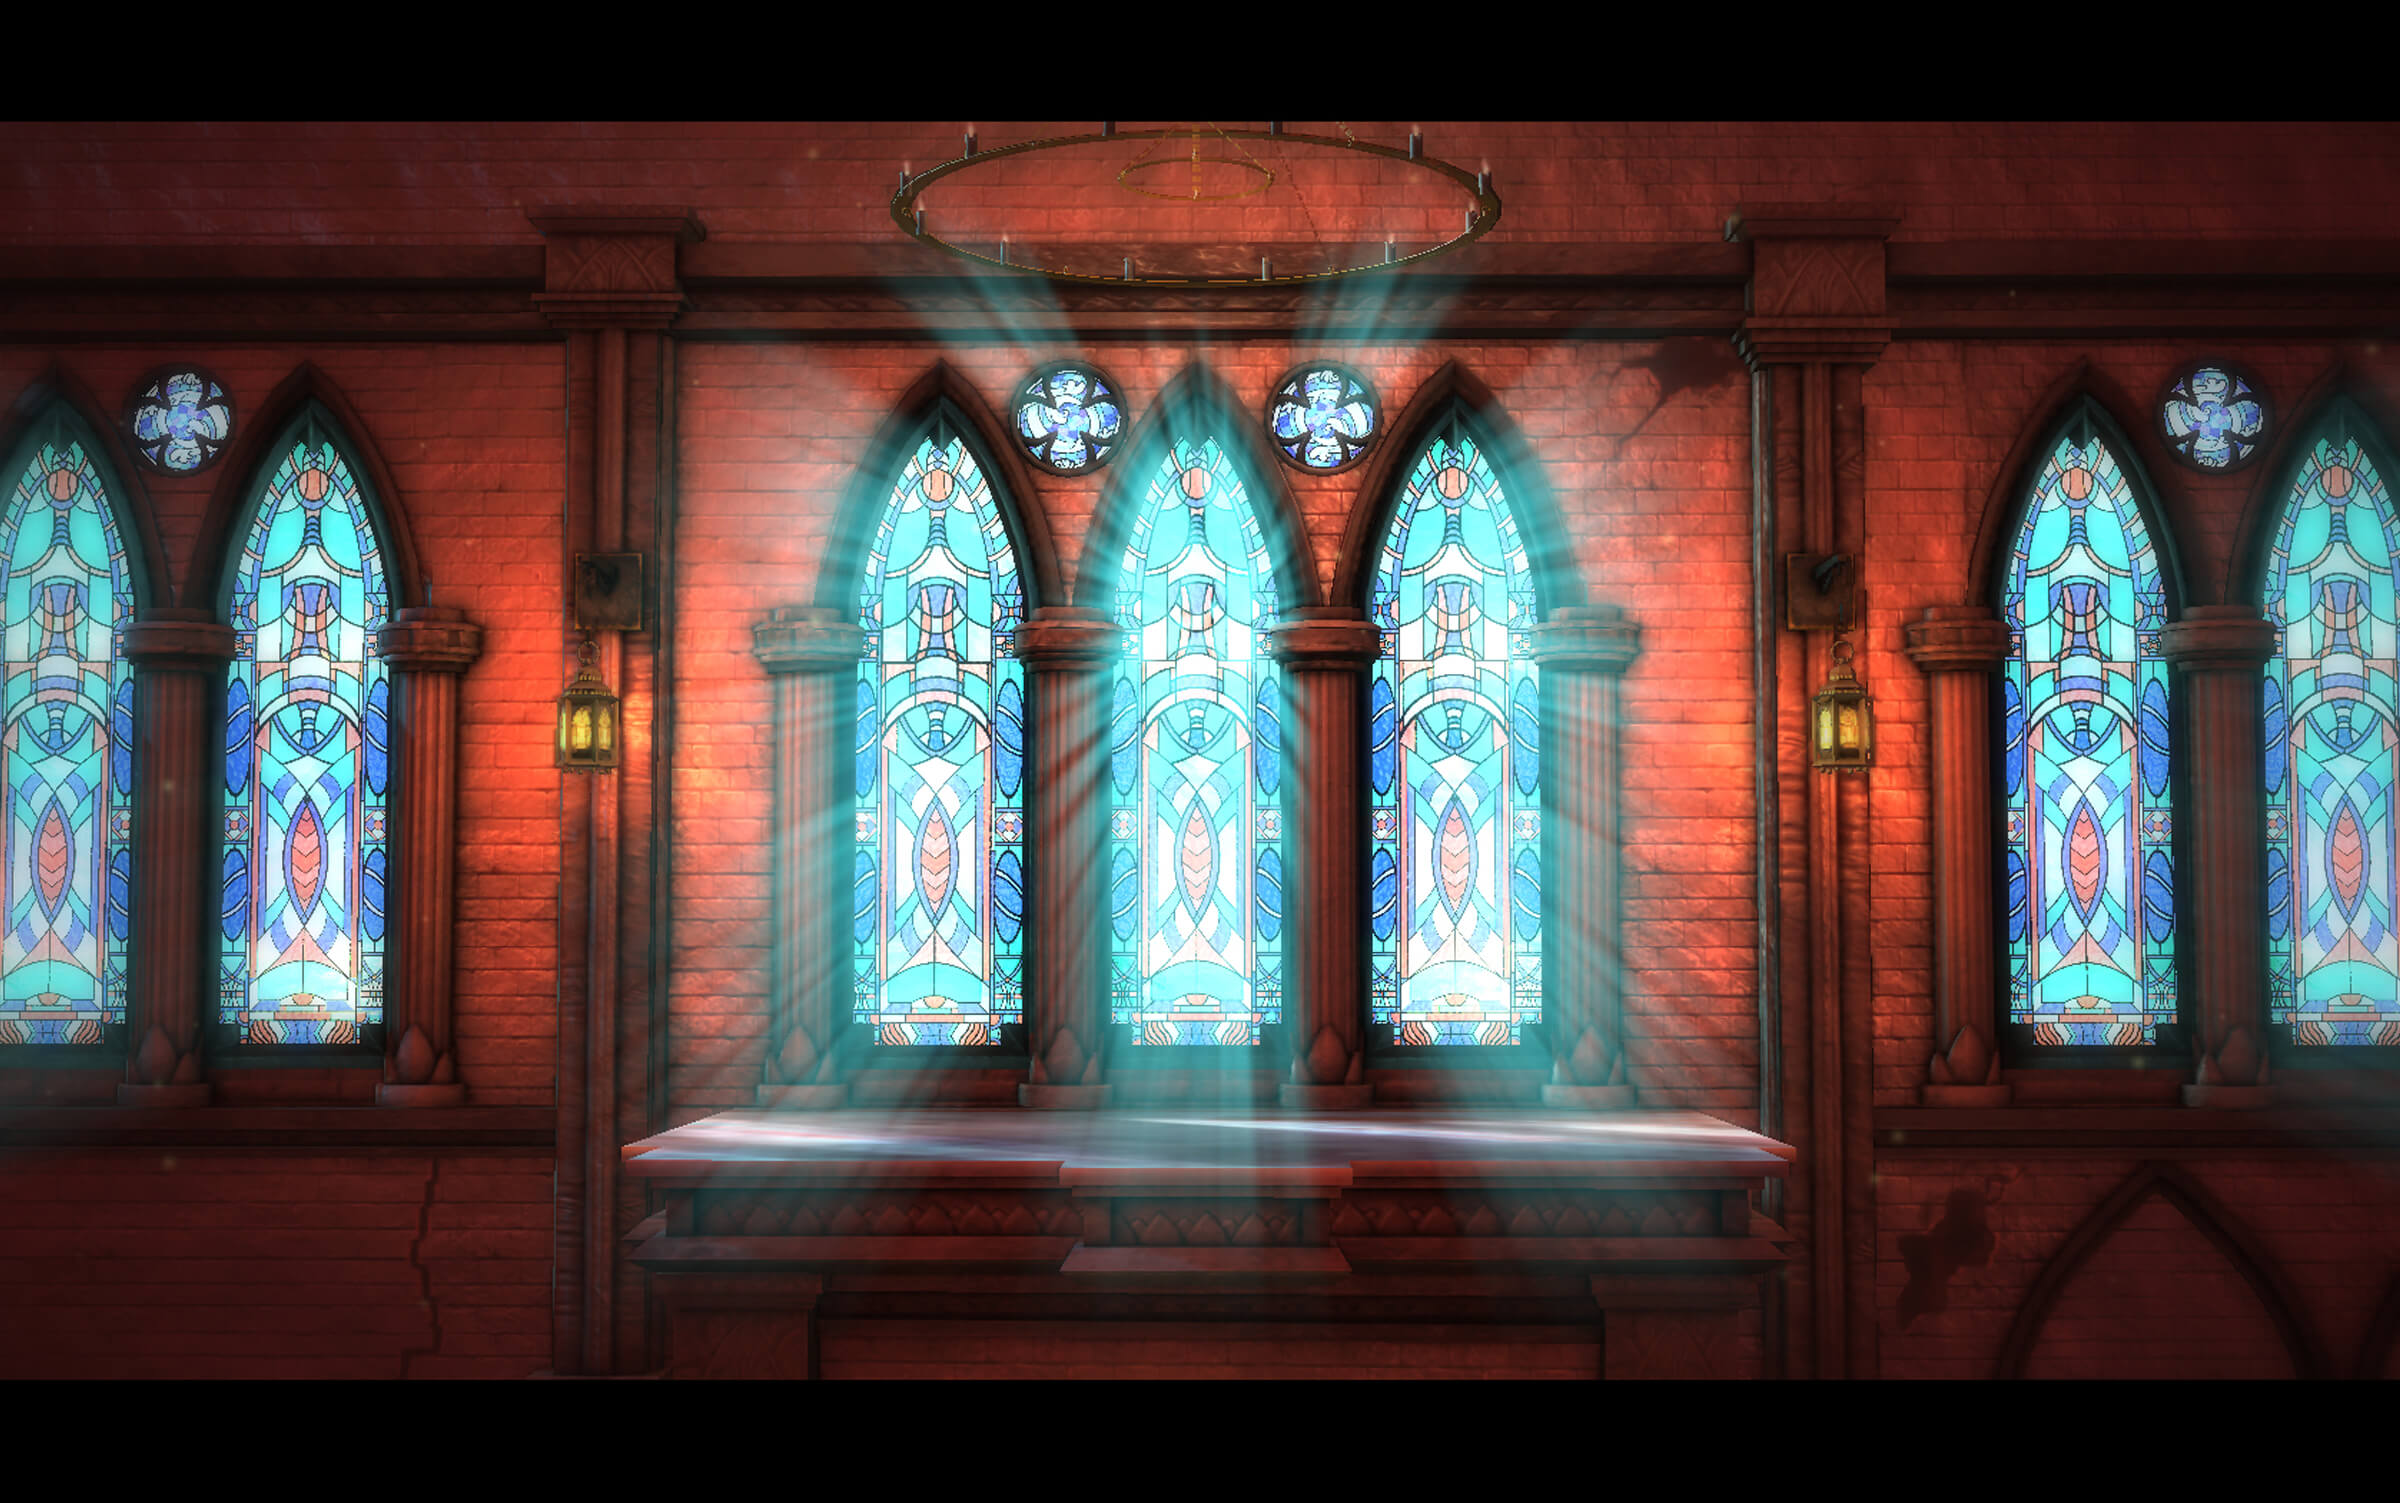 computer-generated 3D environment of the interior of a building with sun pouring through stained glass windows